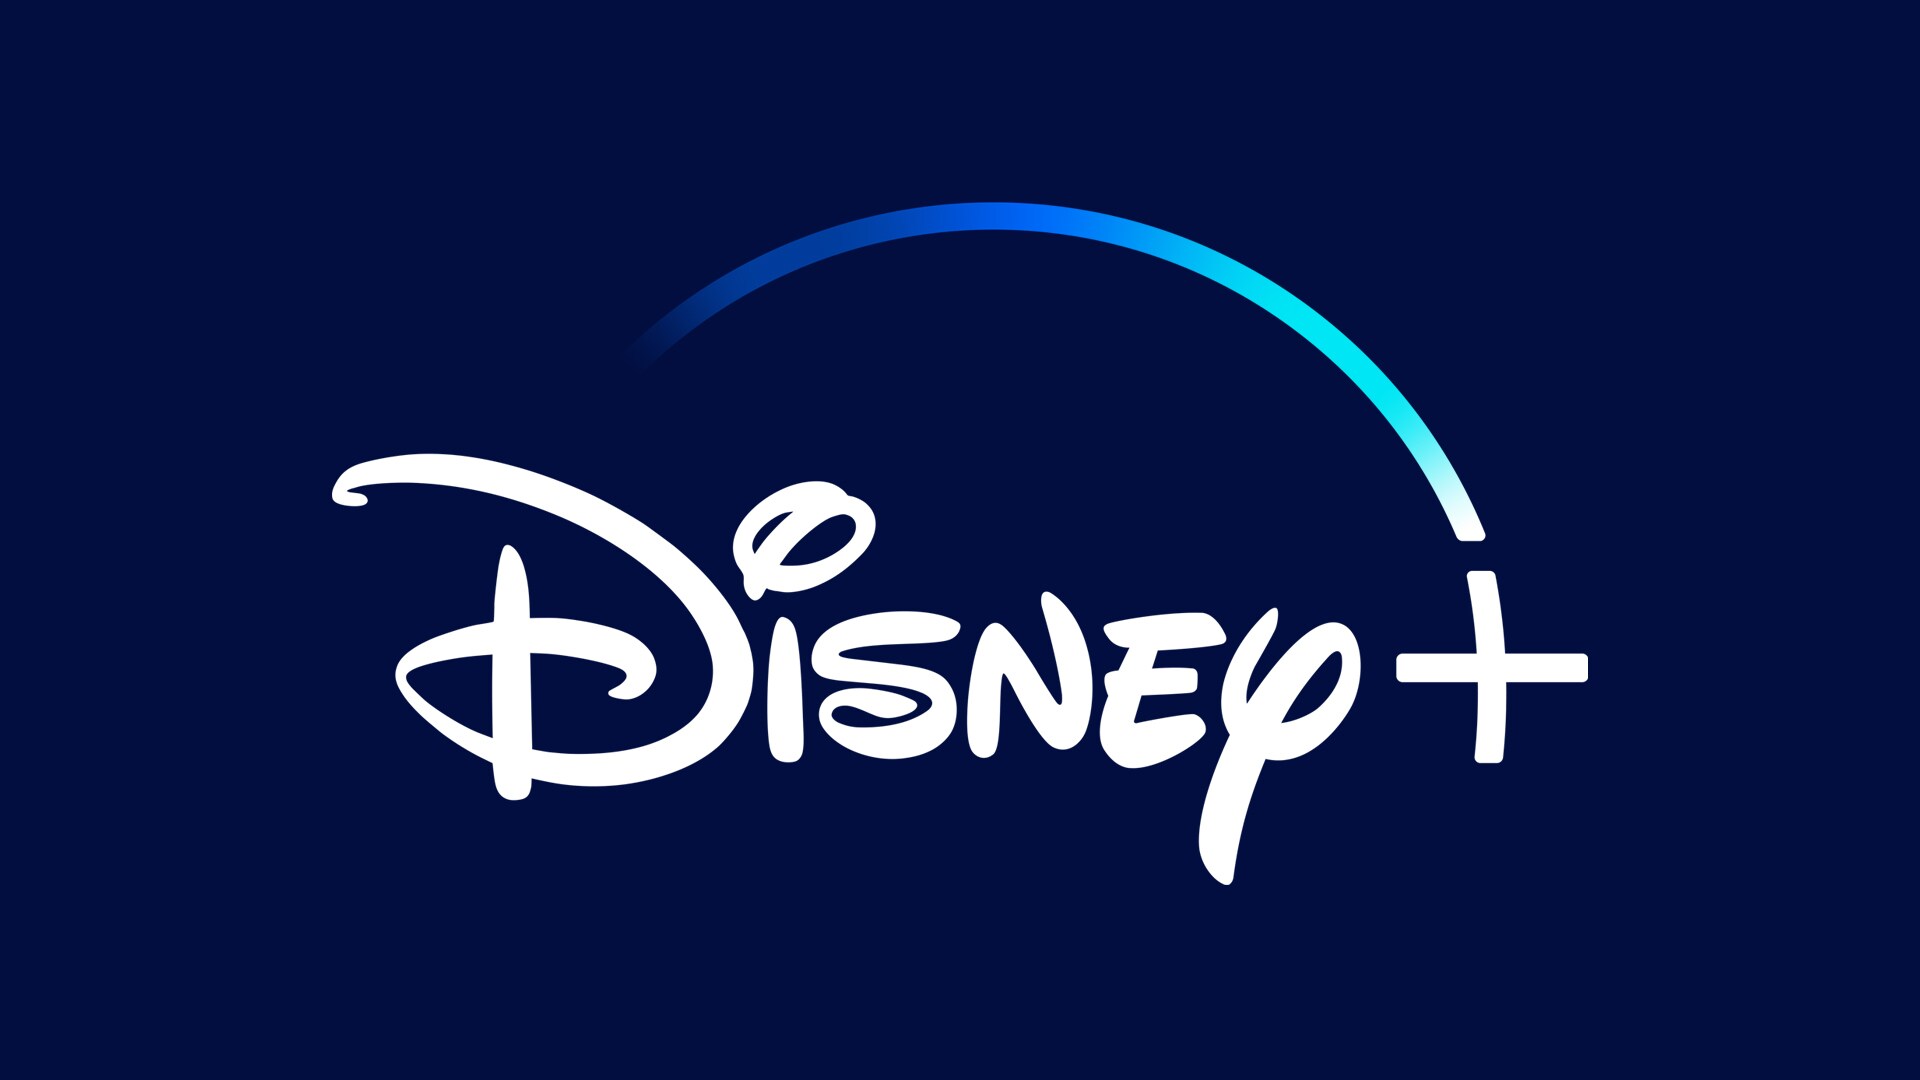 Disney+ Announces Sing-Along Versions Of Seven Disney Classics, Including “Moana” And “The Little Mermaid” Launching Friday, July 22